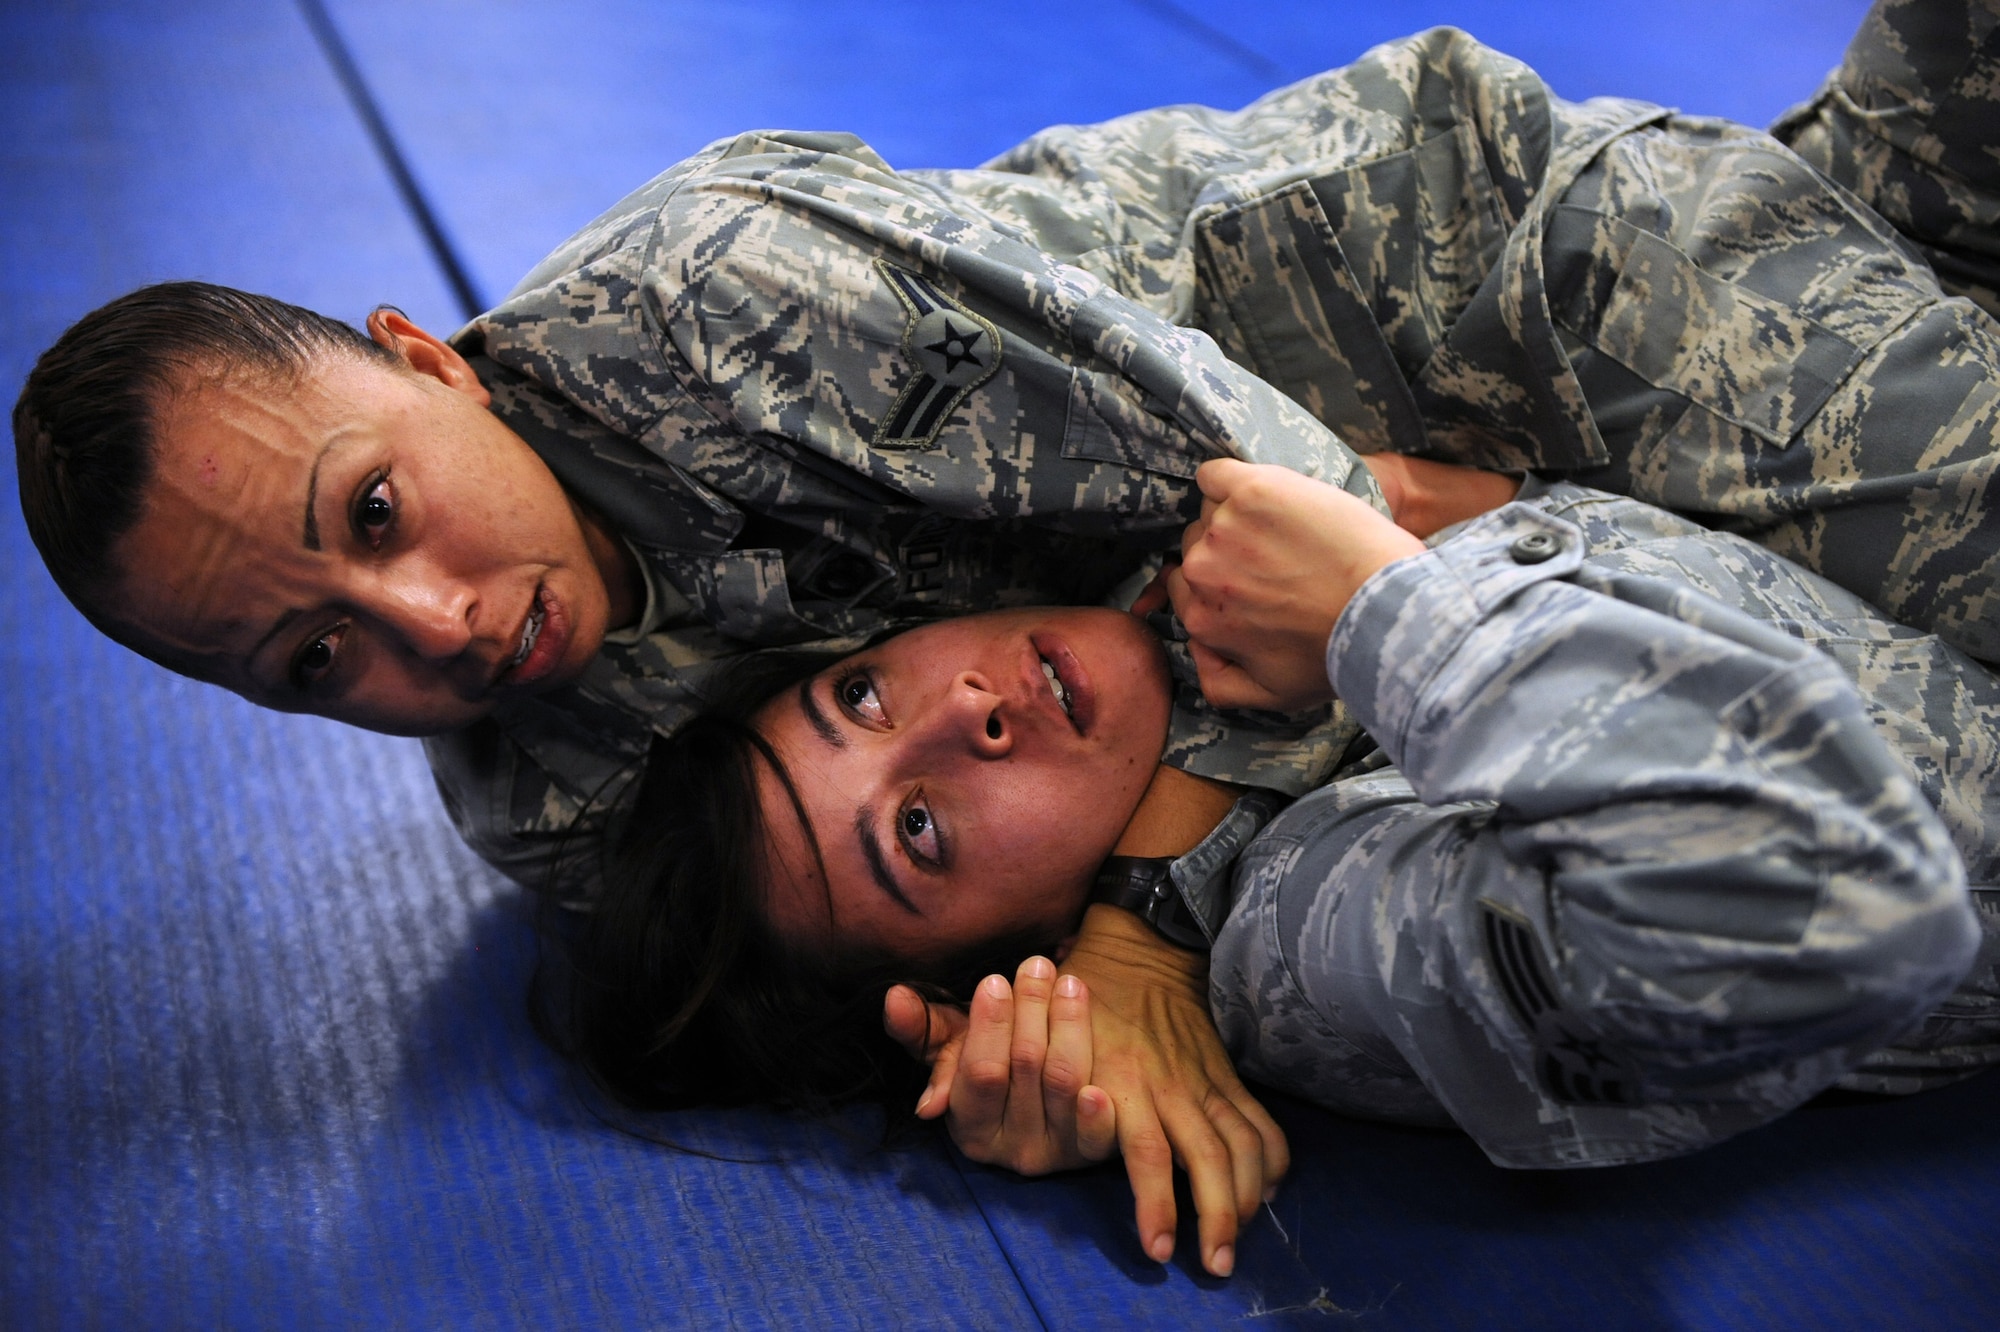 It’s just business….nothing personal. Airman 1st Class Anna Solis applies a free-style stranglehold on Senior Airman Jessica Switzer on March 21 at the Western Army National Guard Aviation Training Site gym in Marana, Ariz. The two security forces specialists were part of an intense 5-day, Army National Guard-instructed training event titled Basic Combative Course. (U.S. Air Force Photo by Airman 1st Class Chris Drzazgowski/Released)